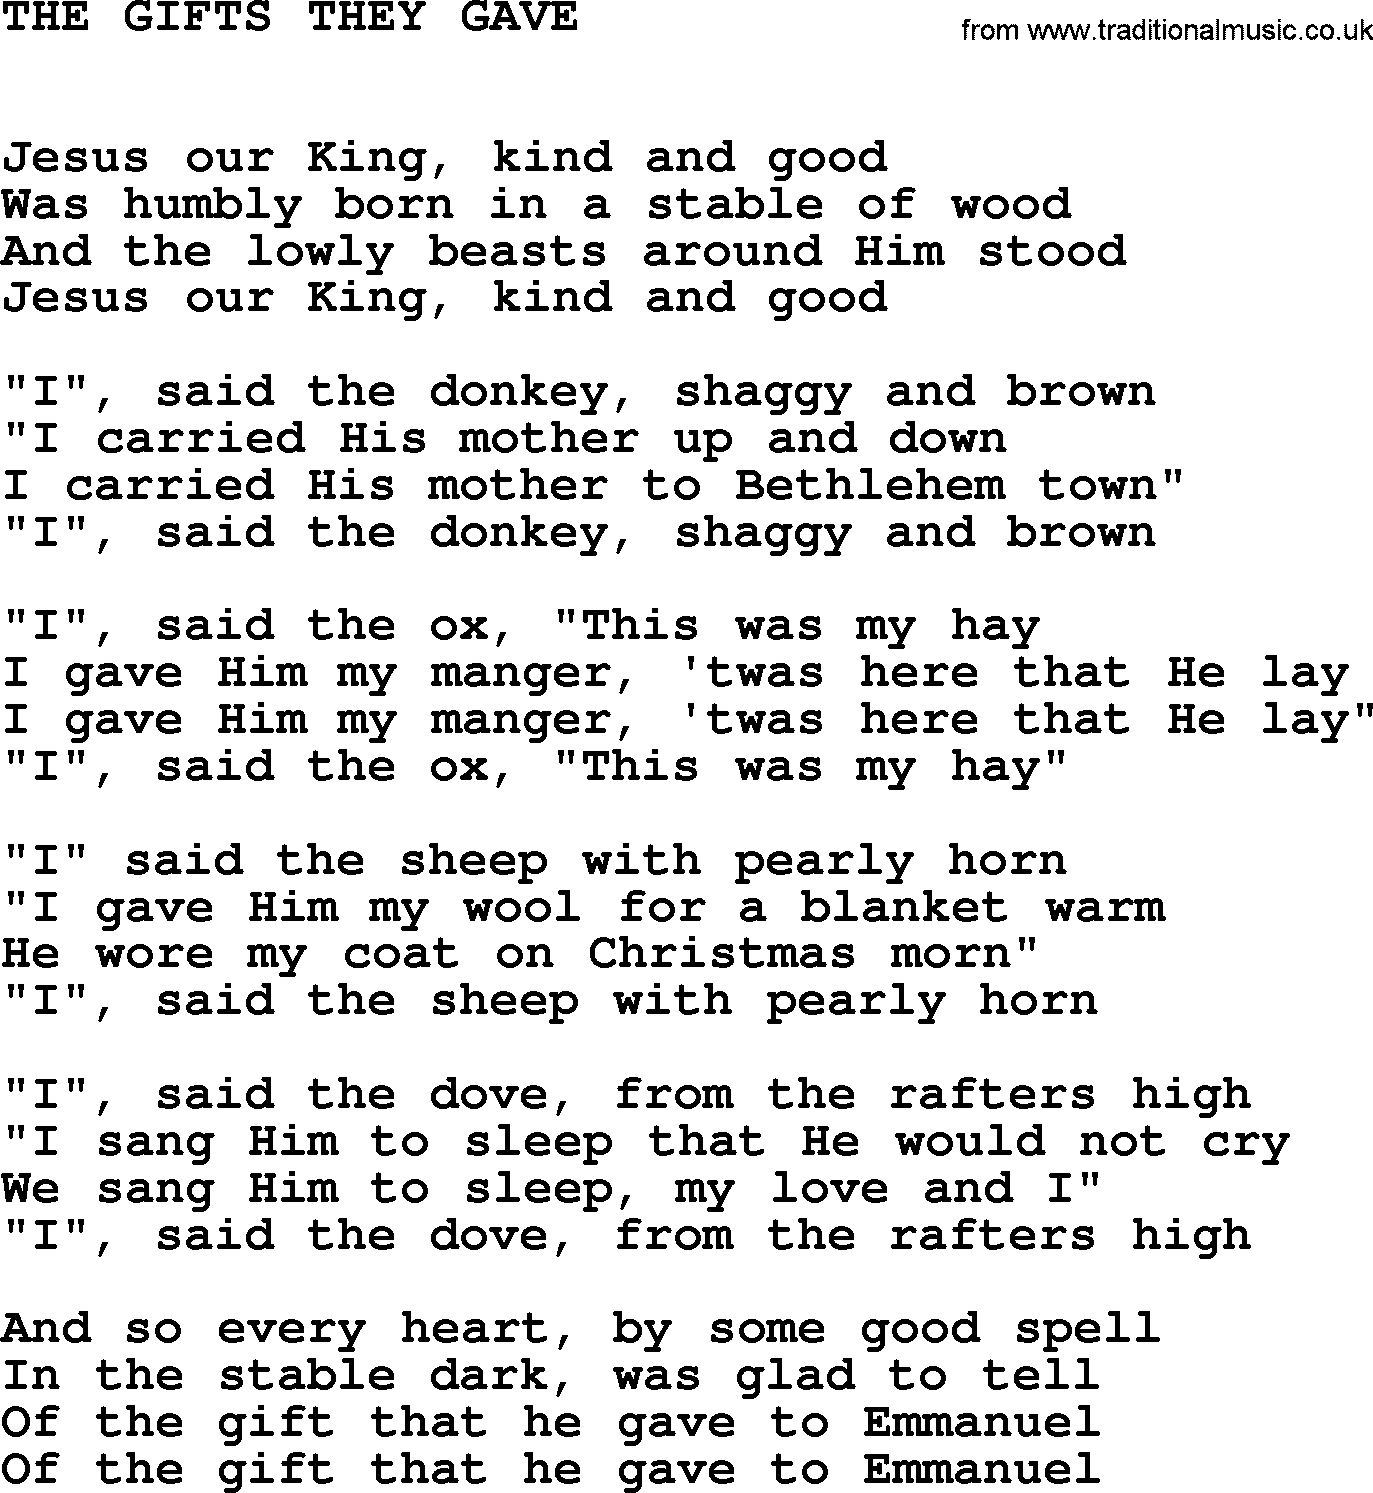 Johnny Cash song The Gifts They Gave.txt lyrics